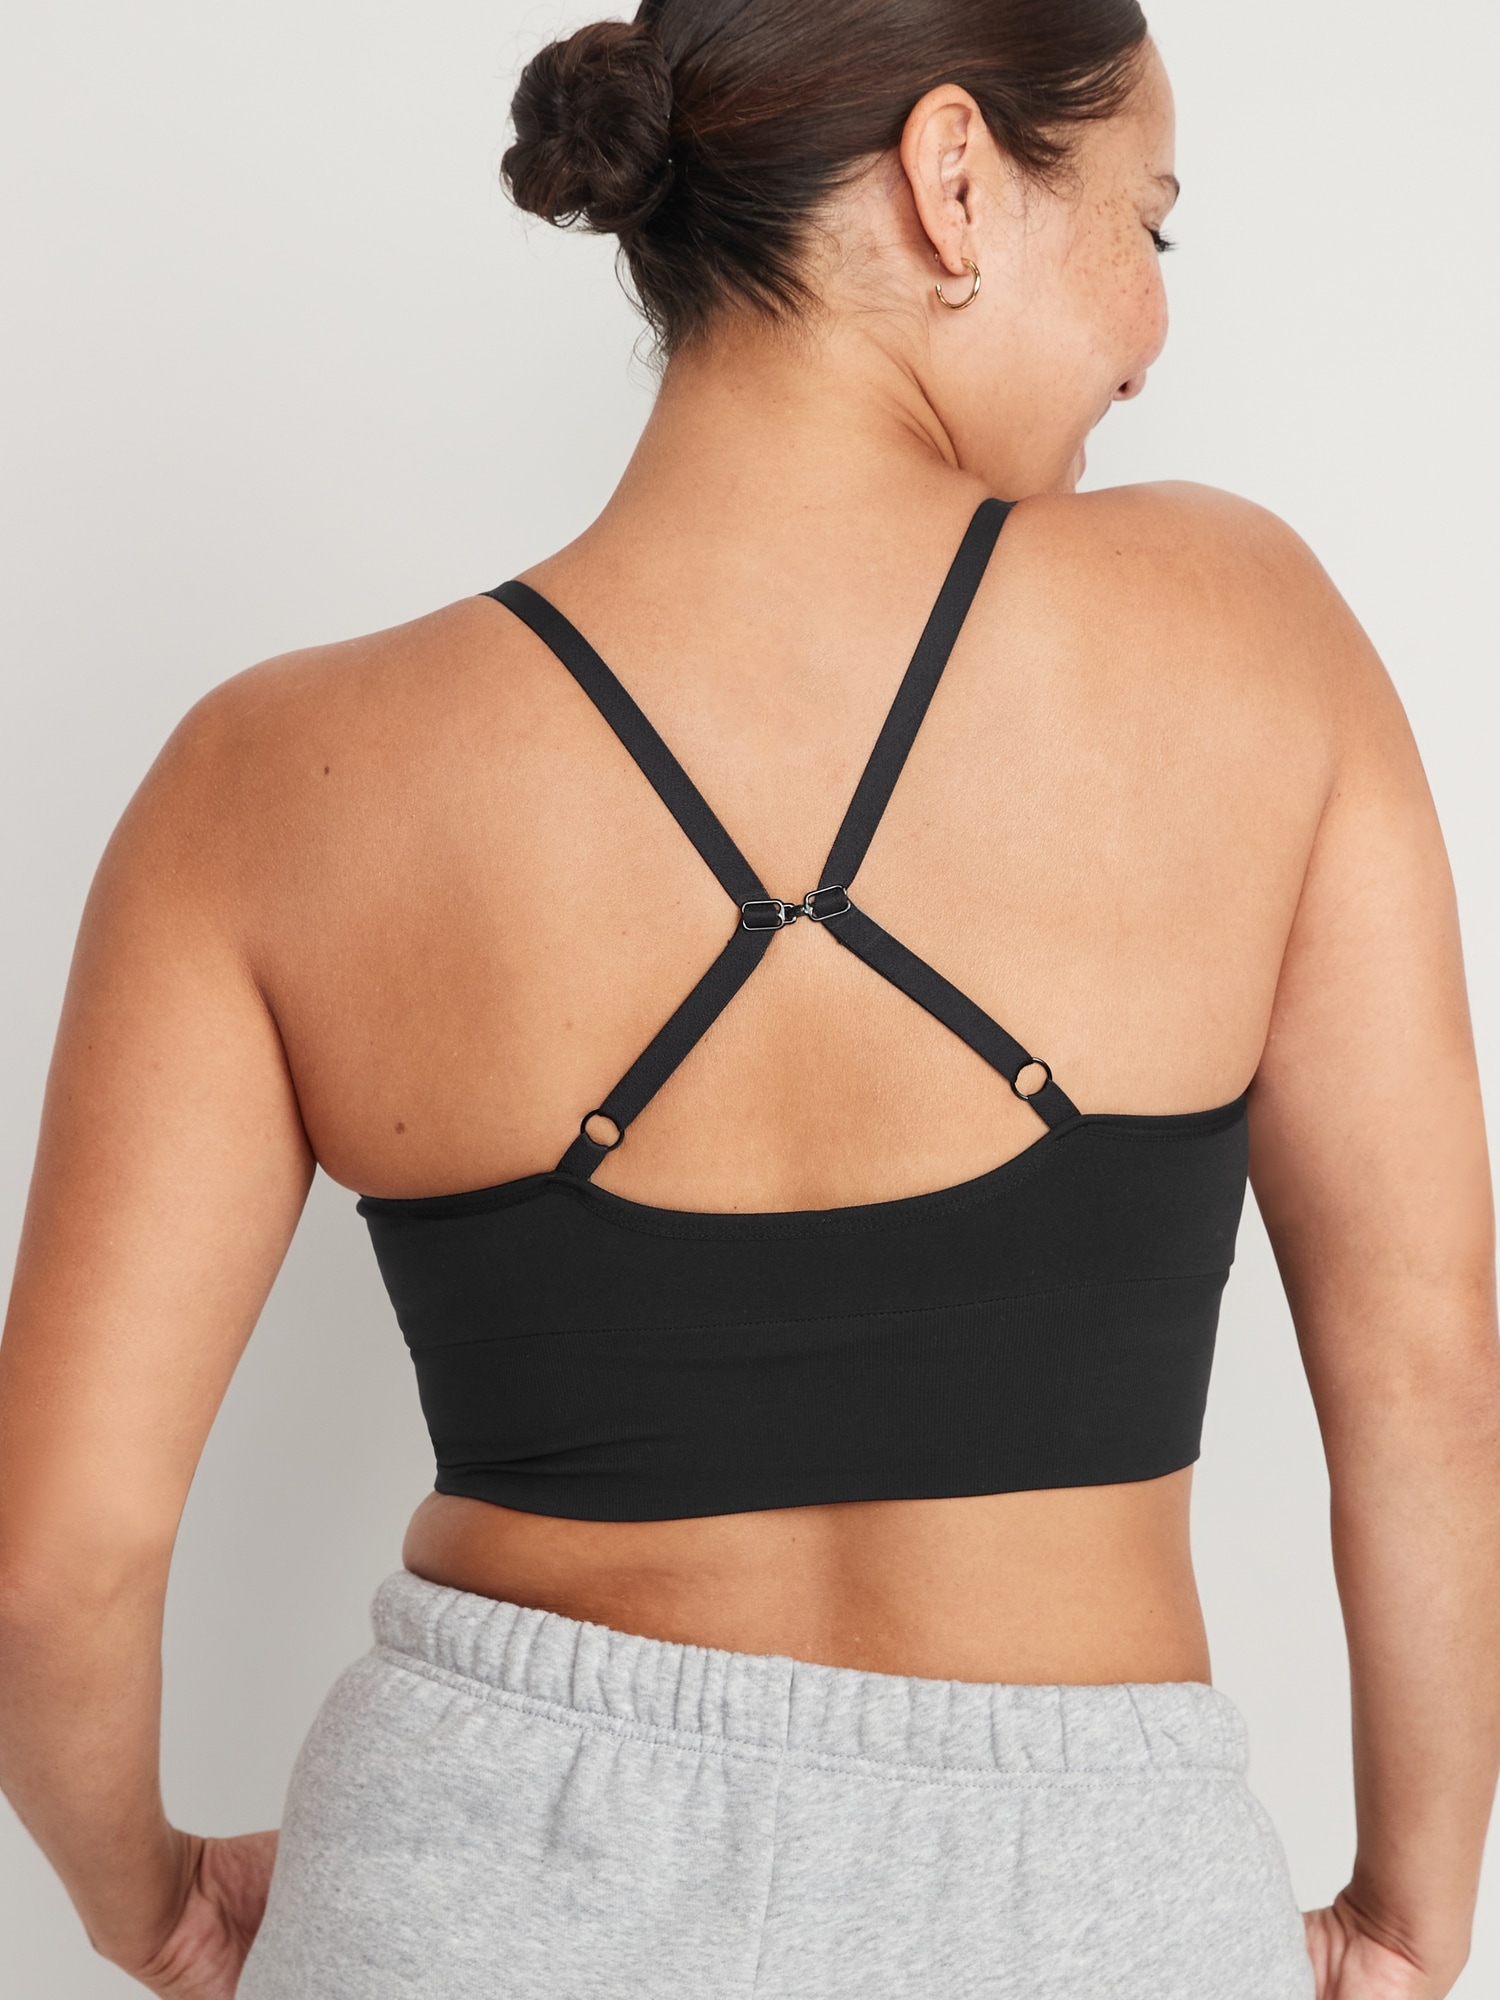 Buy Lupantte Pumping Bra Hands Free, Plus Size Pump Bra for 34B-48F,  Comfortable and Adjustable Nursing Bra for Pumping, Fit for Pumps Like  Spectra, Lansinoh, Philips Avent, Medela etc (Medium) Online at